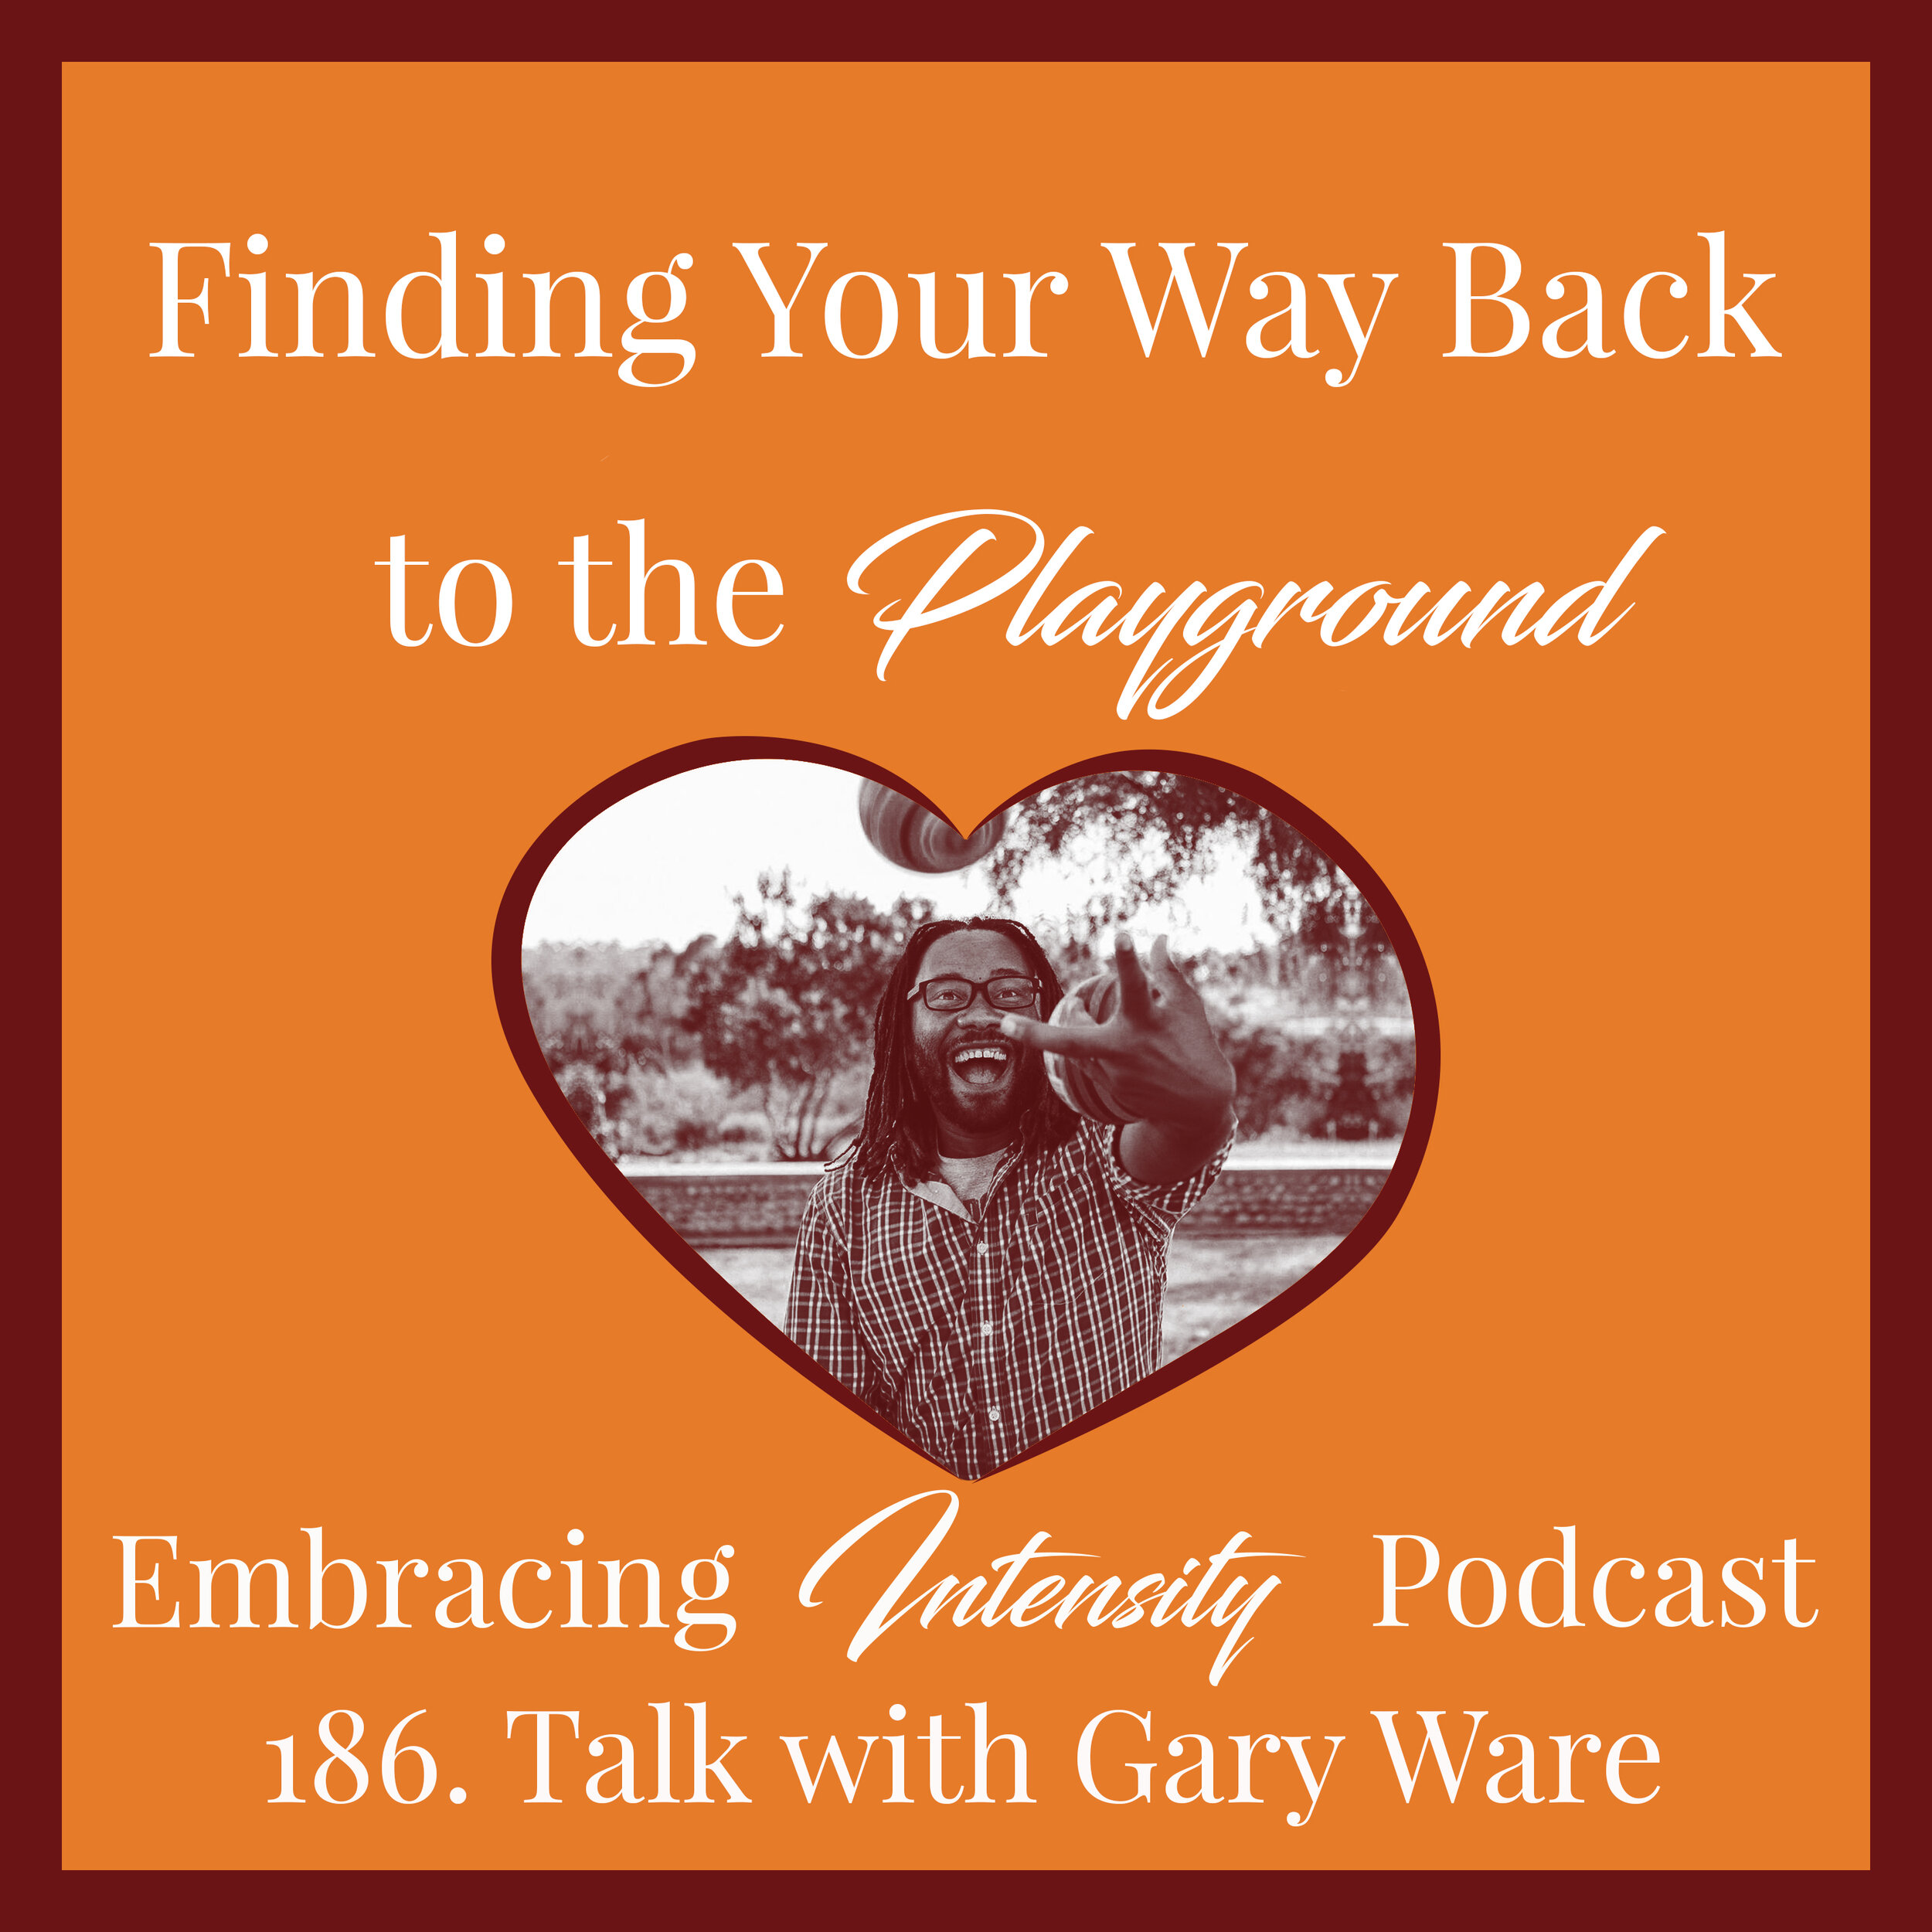 Finding Your Way Back to the Playground with Gary Ware